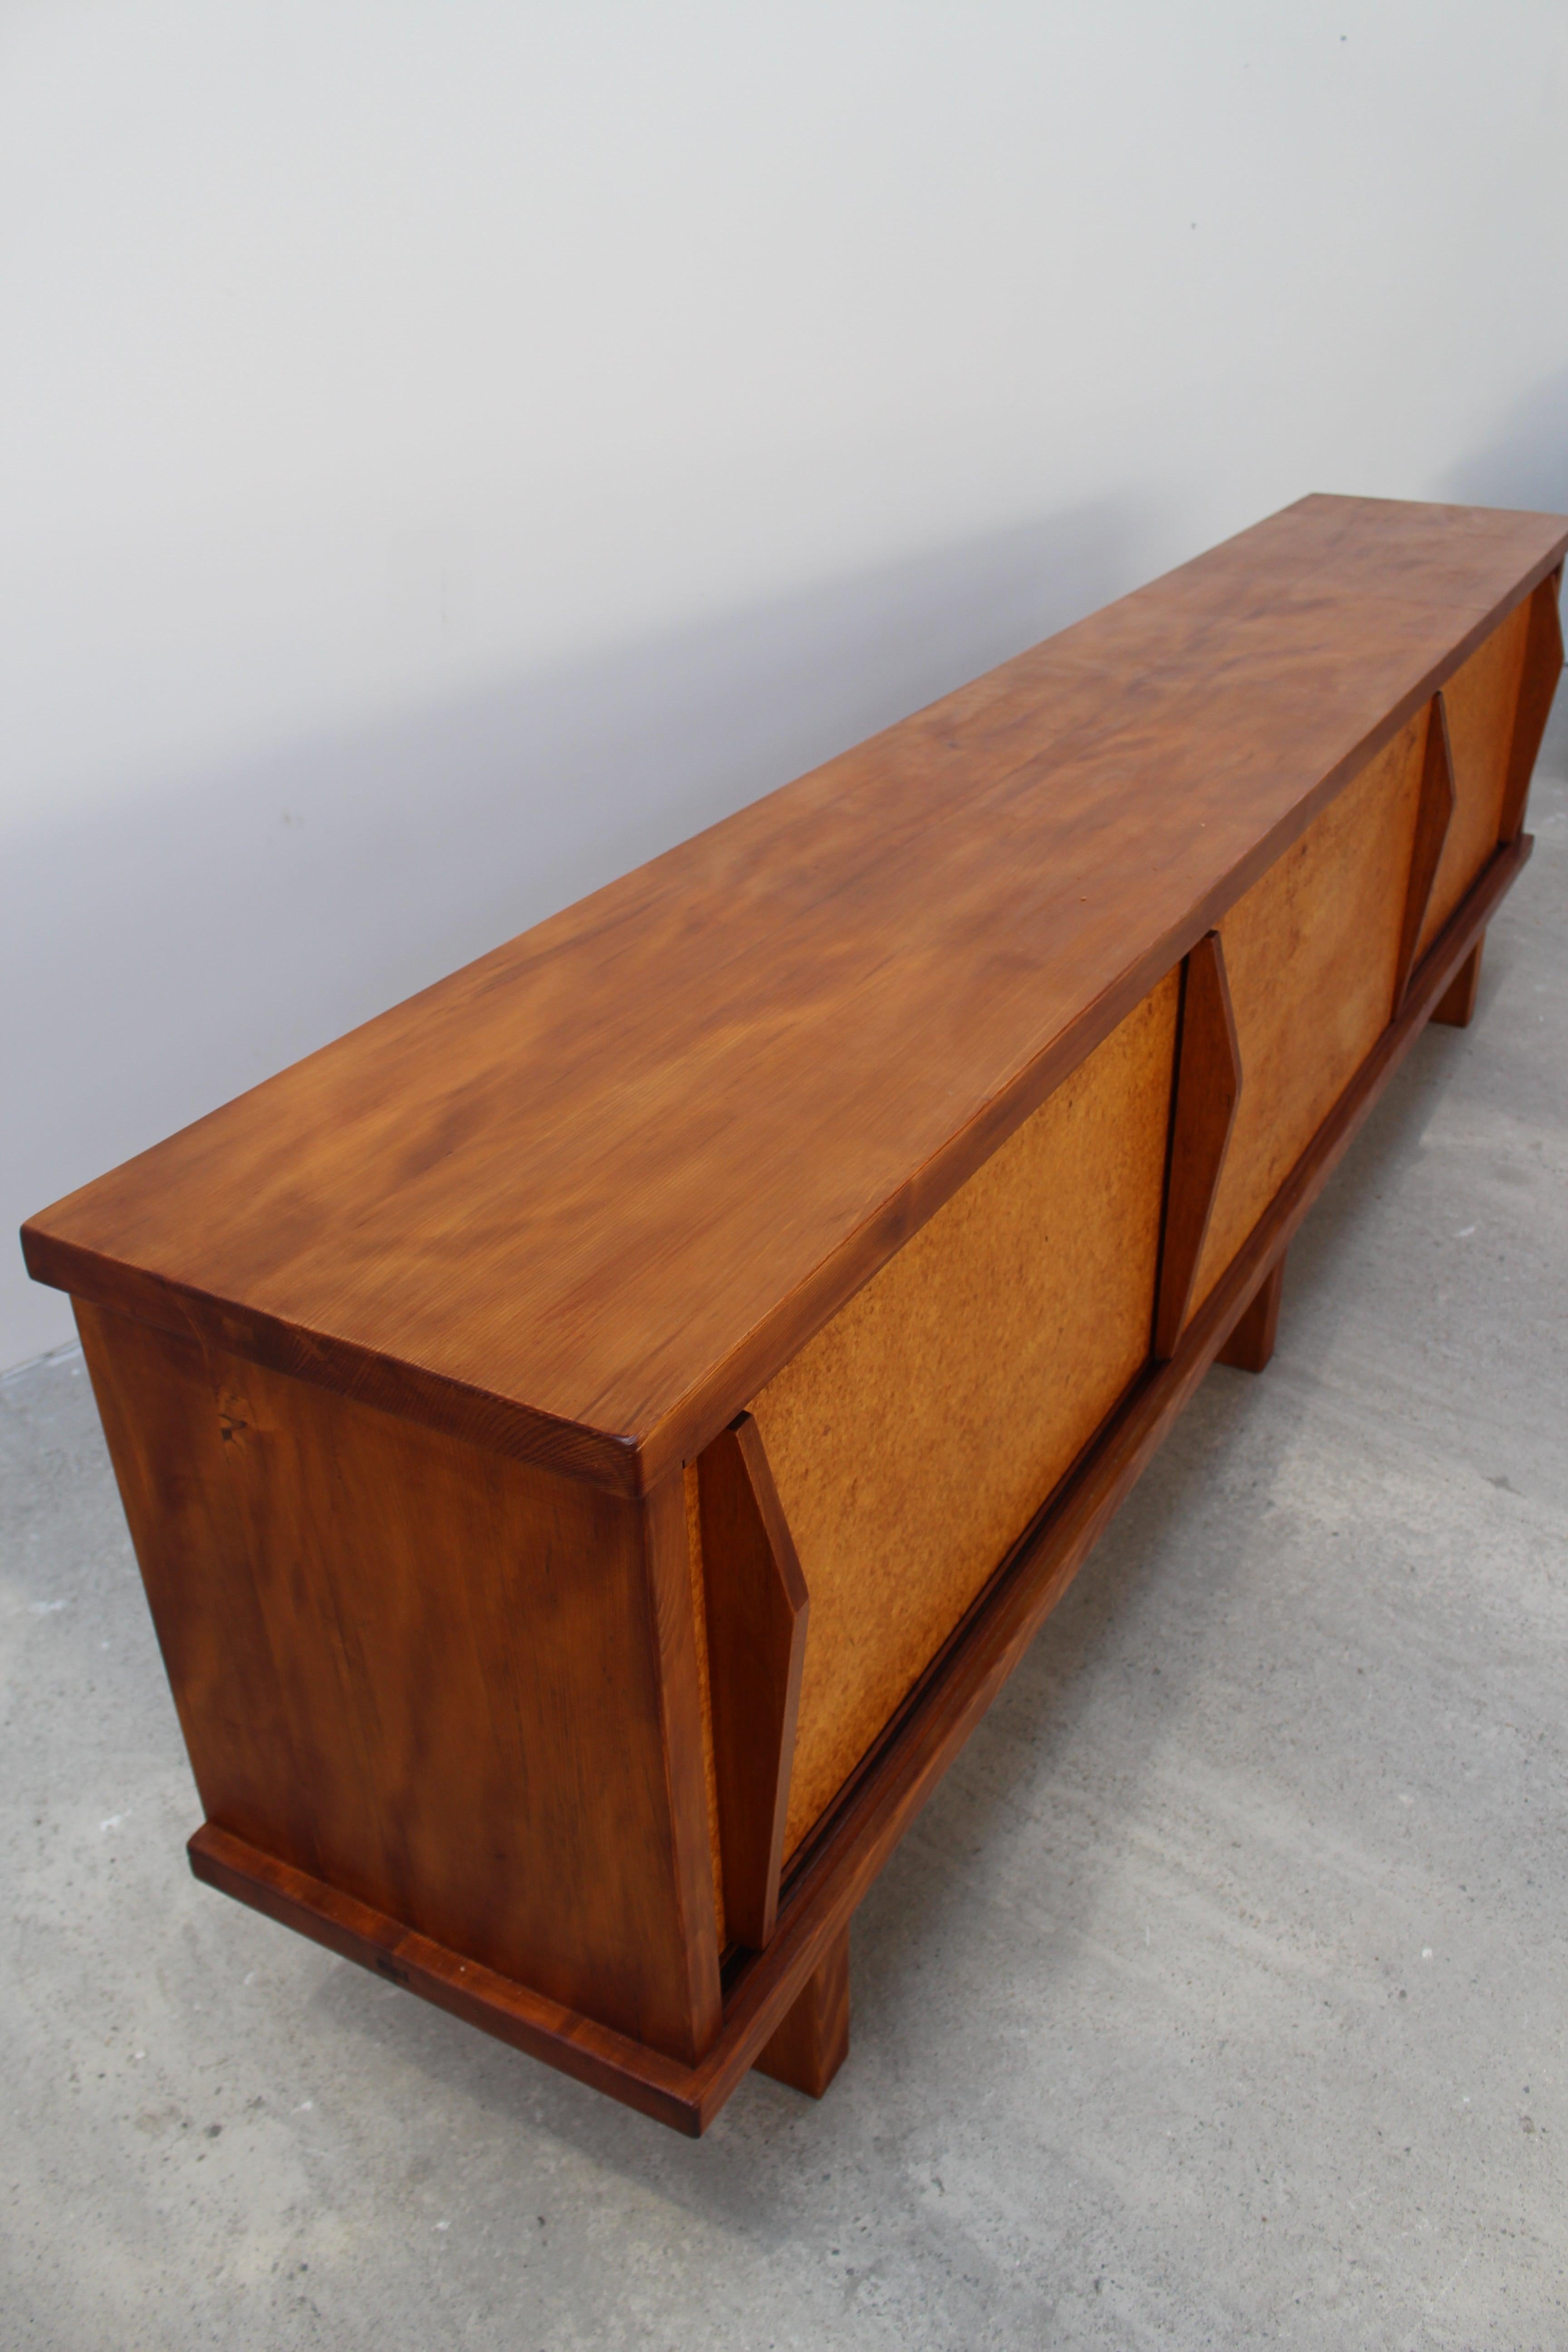 French Sideboard Charlotte Perriand, Recycled and Designed by Clement Cividino